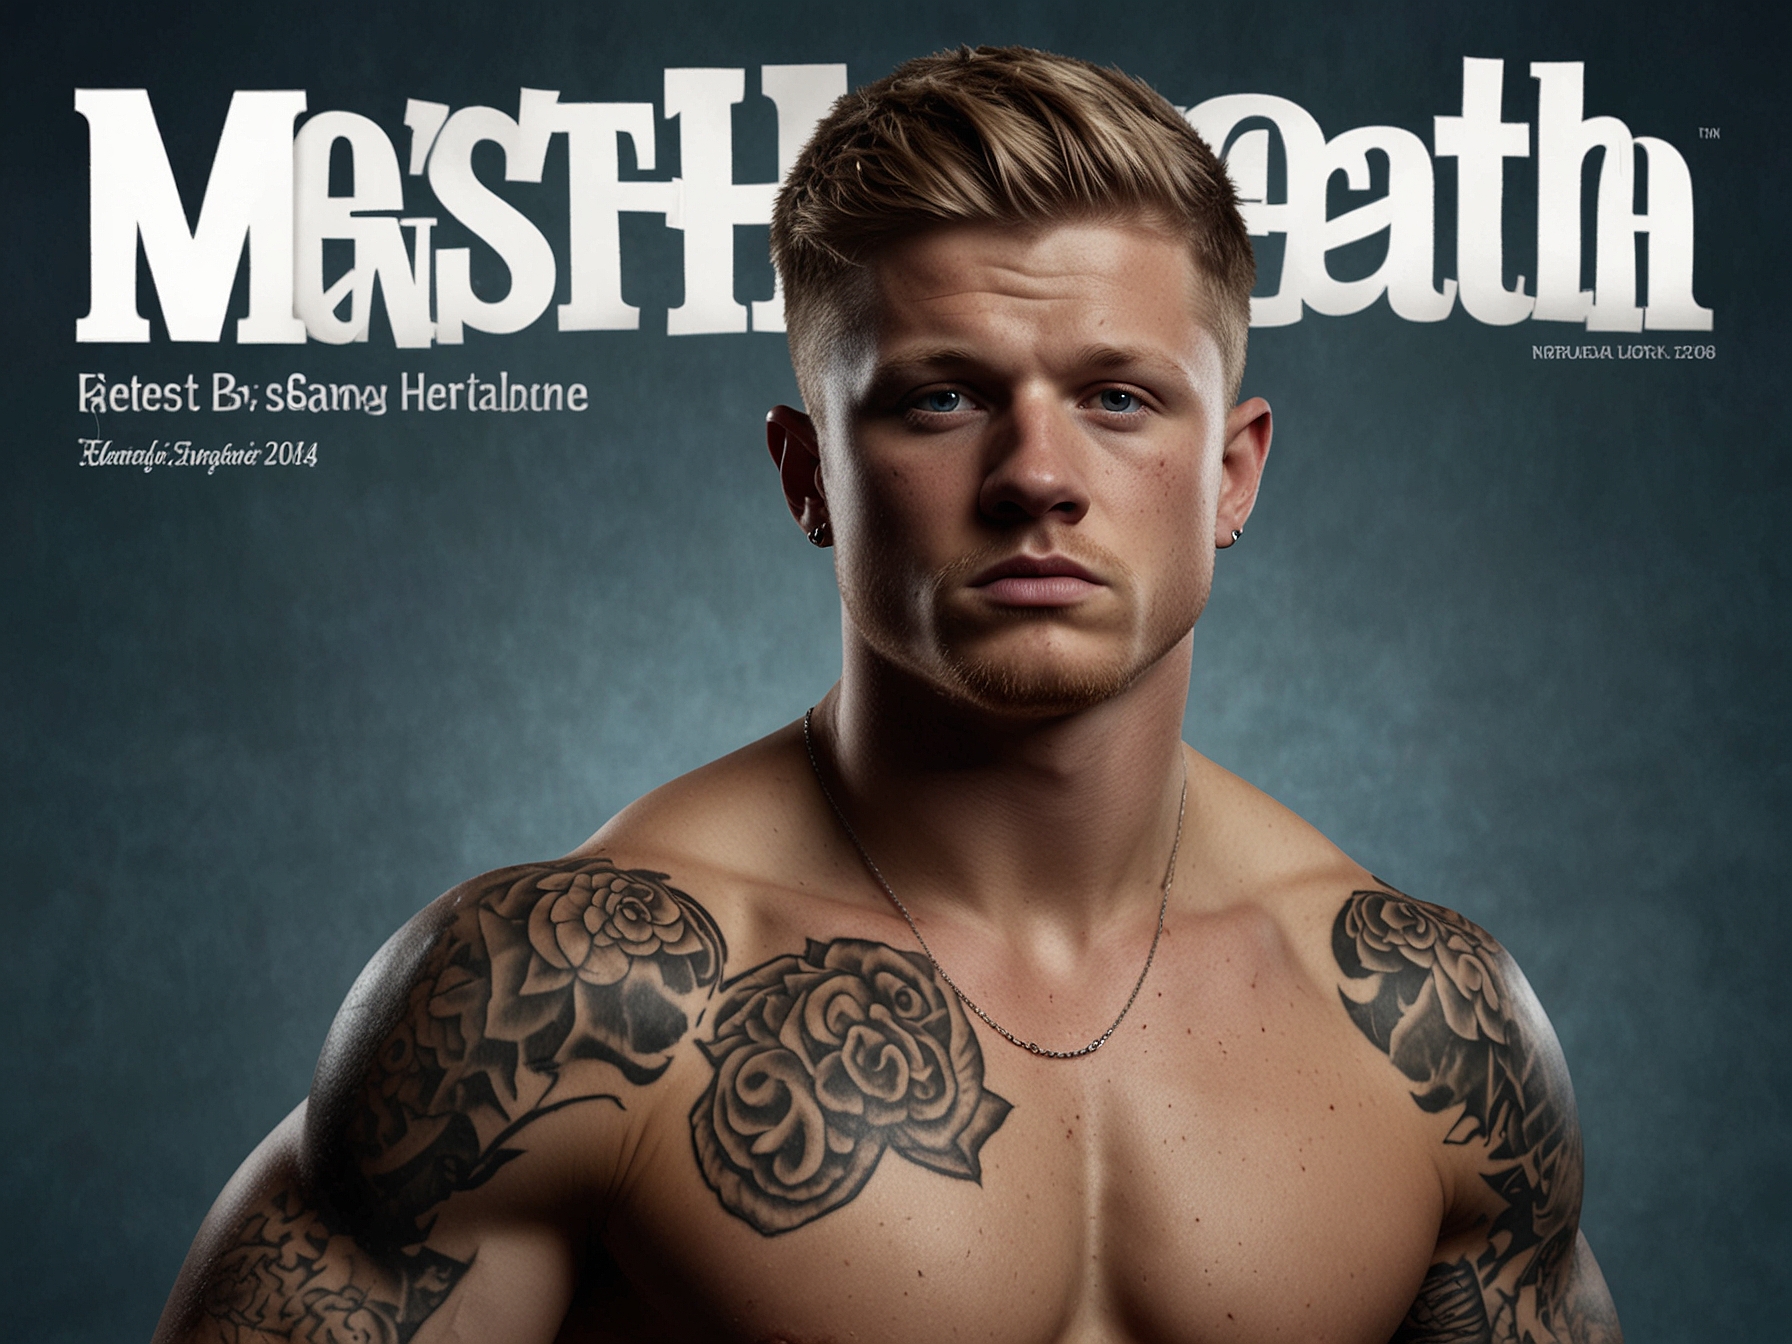 Adam Peaty on the cover of Men's Health UK, showcasing his impressive tattoos and powerful build, ahead of the Paris Olympics, symbolizing both his physical strength and personal struggles.